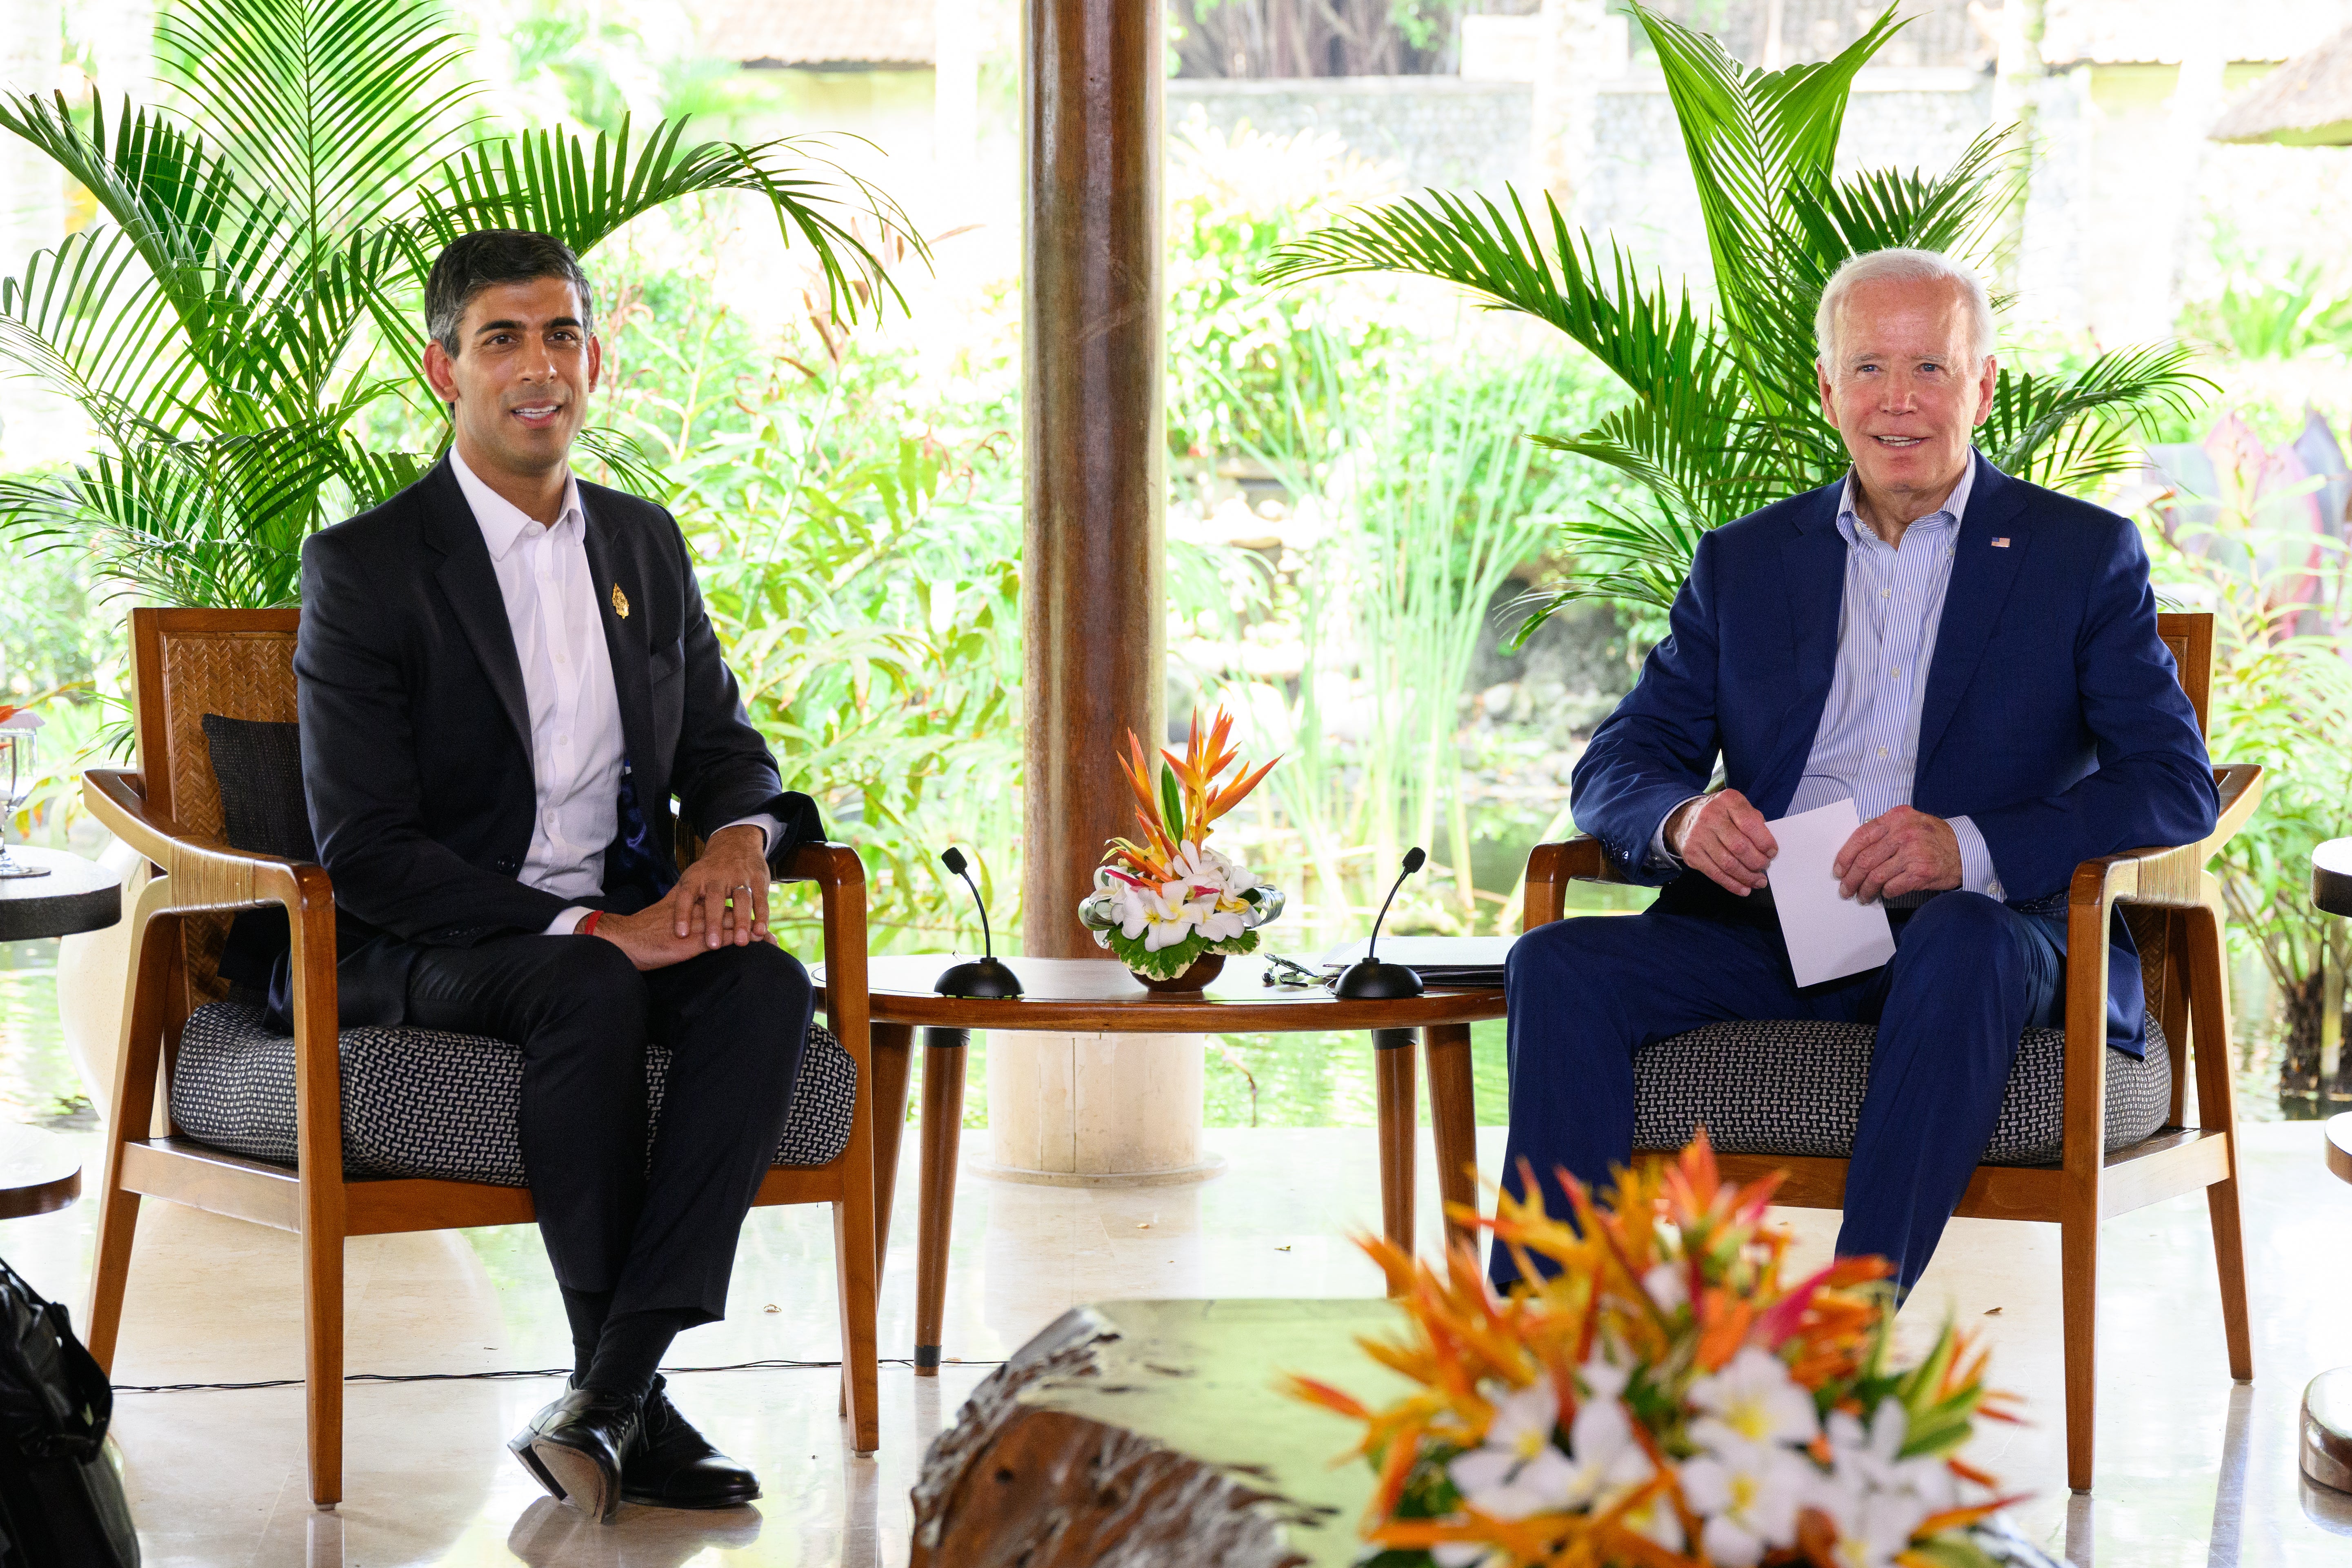 British prime minister Rishi Sunak speaks with US president Joe Biden during a bilateral meeting at the G20 summit on 16 November 2022 in Nusa Dua, Indonesia